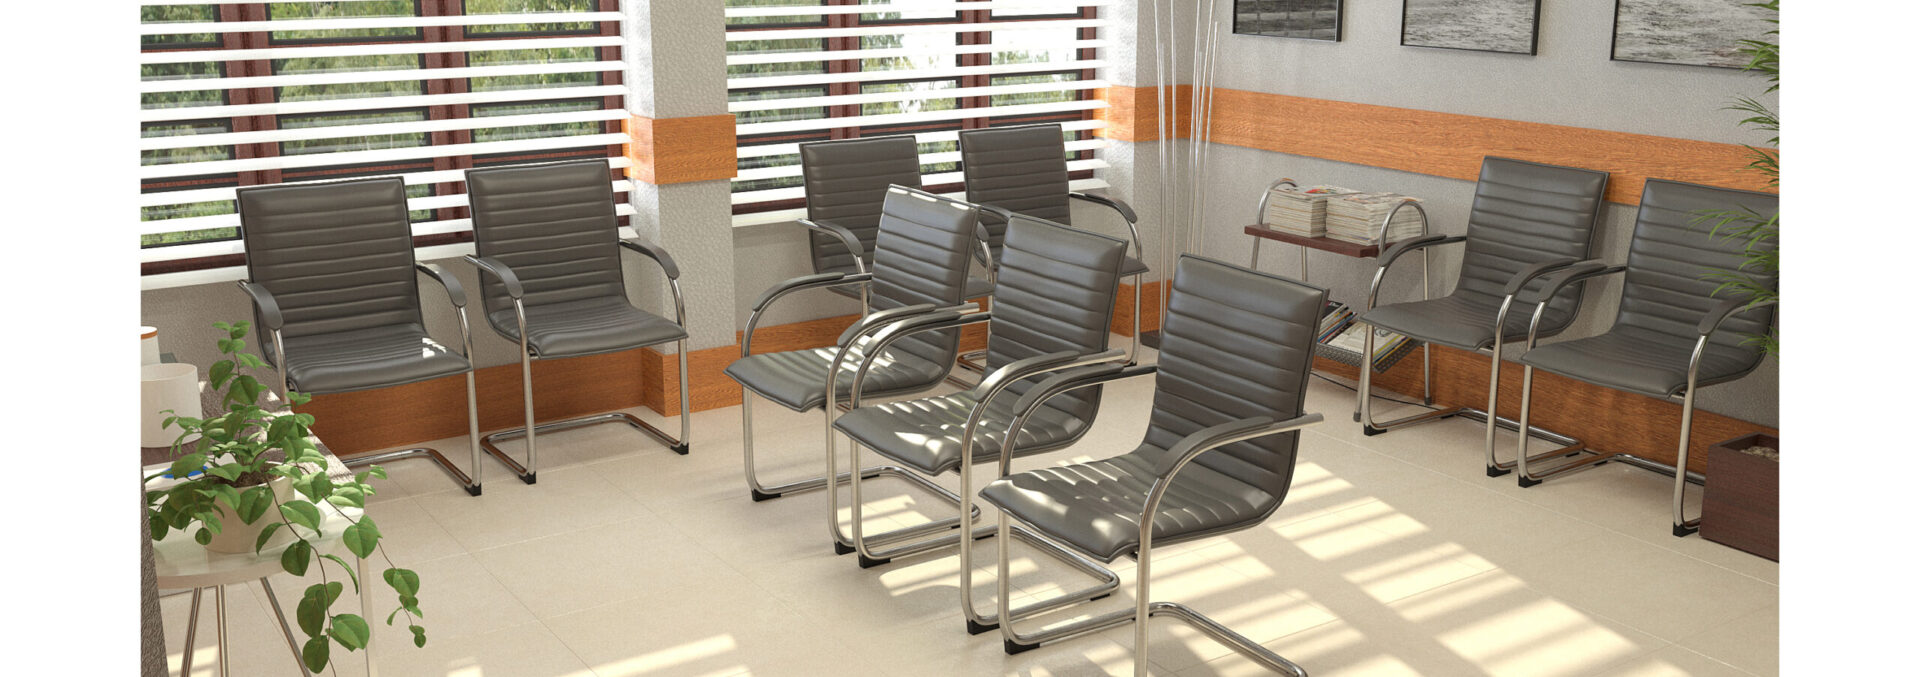 http://boss-chair.com/wp-content/uploads/2023/01/B9536-GY-2_RENDER-scaled-1920x677.jpg